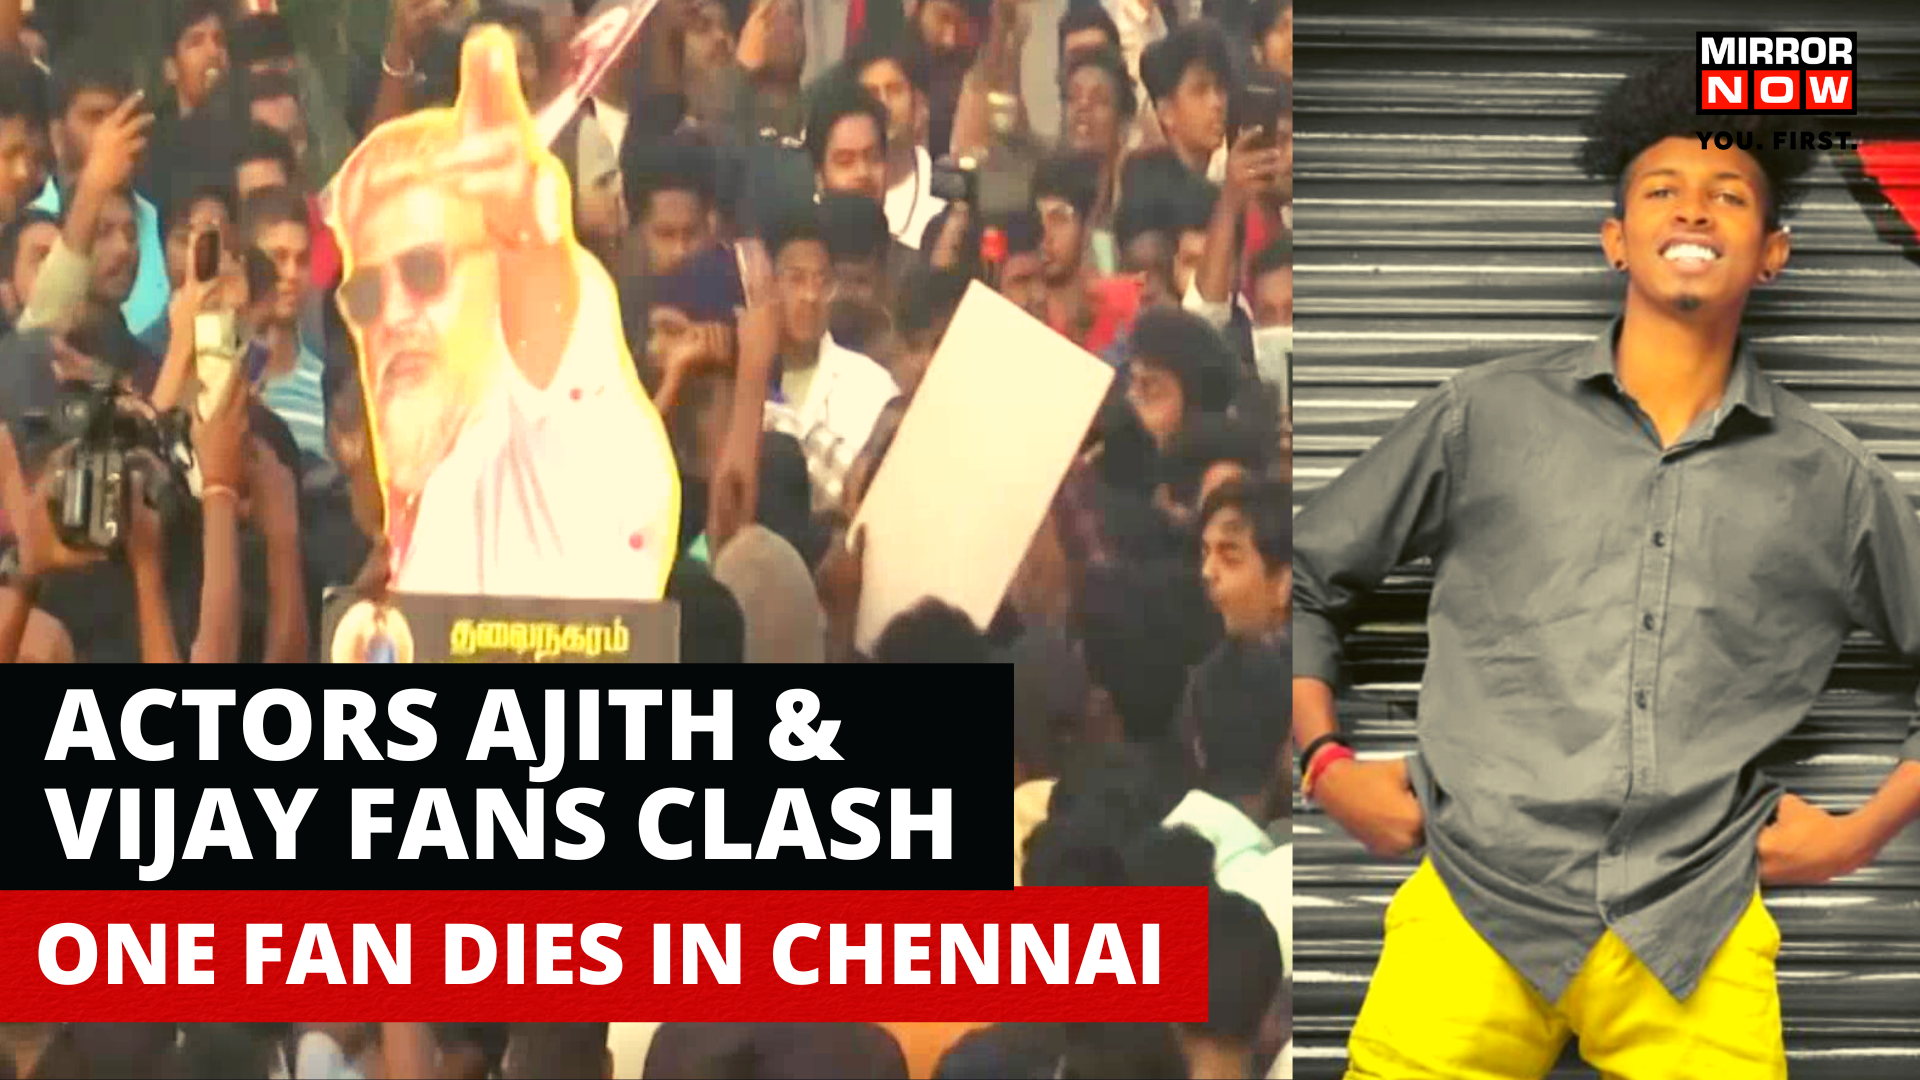 Actor Ajith Kumars Thunivu Released Chennai Fan Dies After Falling From Lorry During Celebration